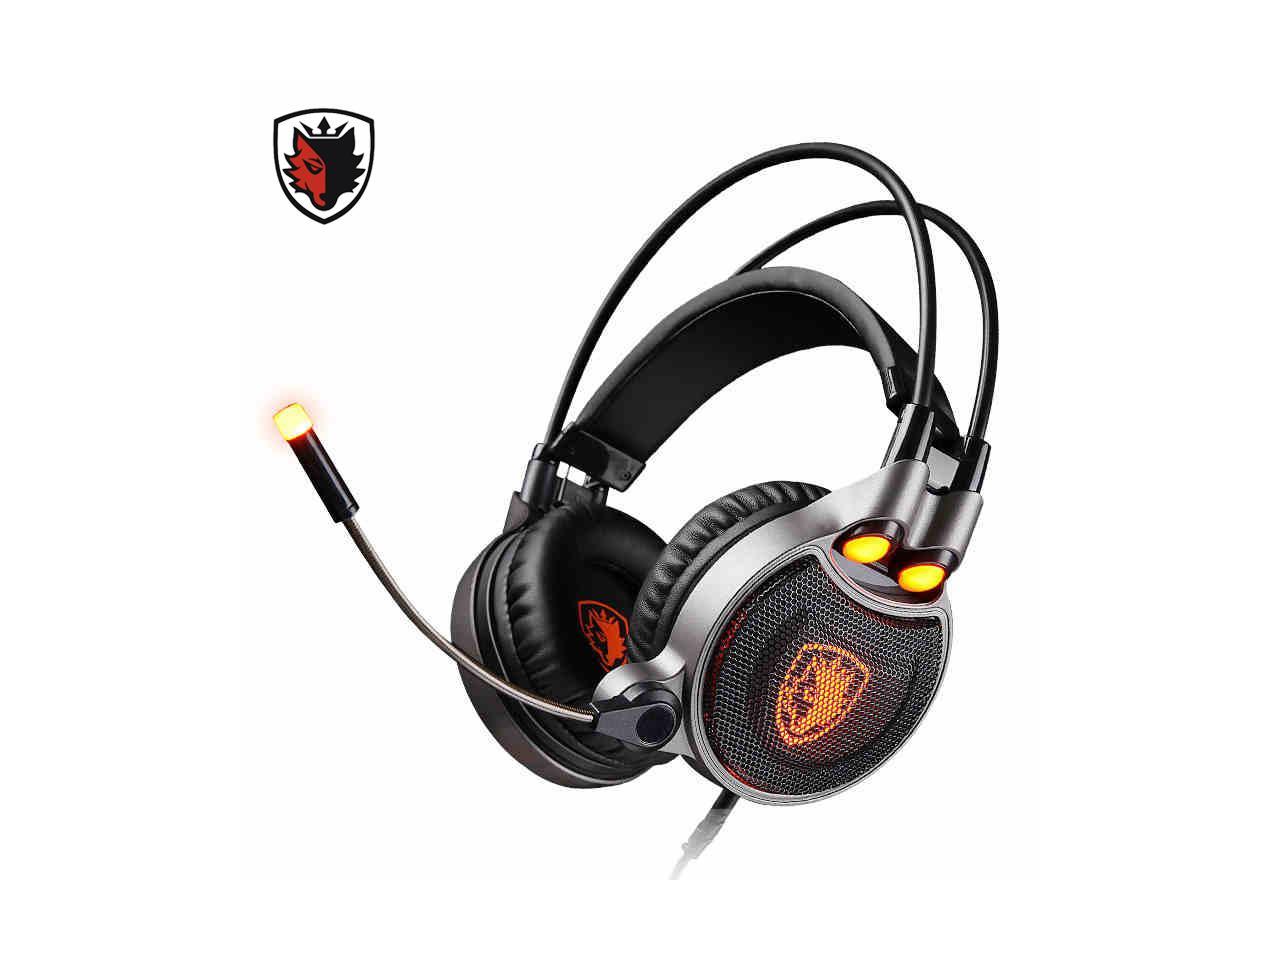 Sades Game Headphones AW70 Deep Bass Stereo Surround Headband Gaming Headsets Head Phone with Light Microphone for Computer PC Gamer